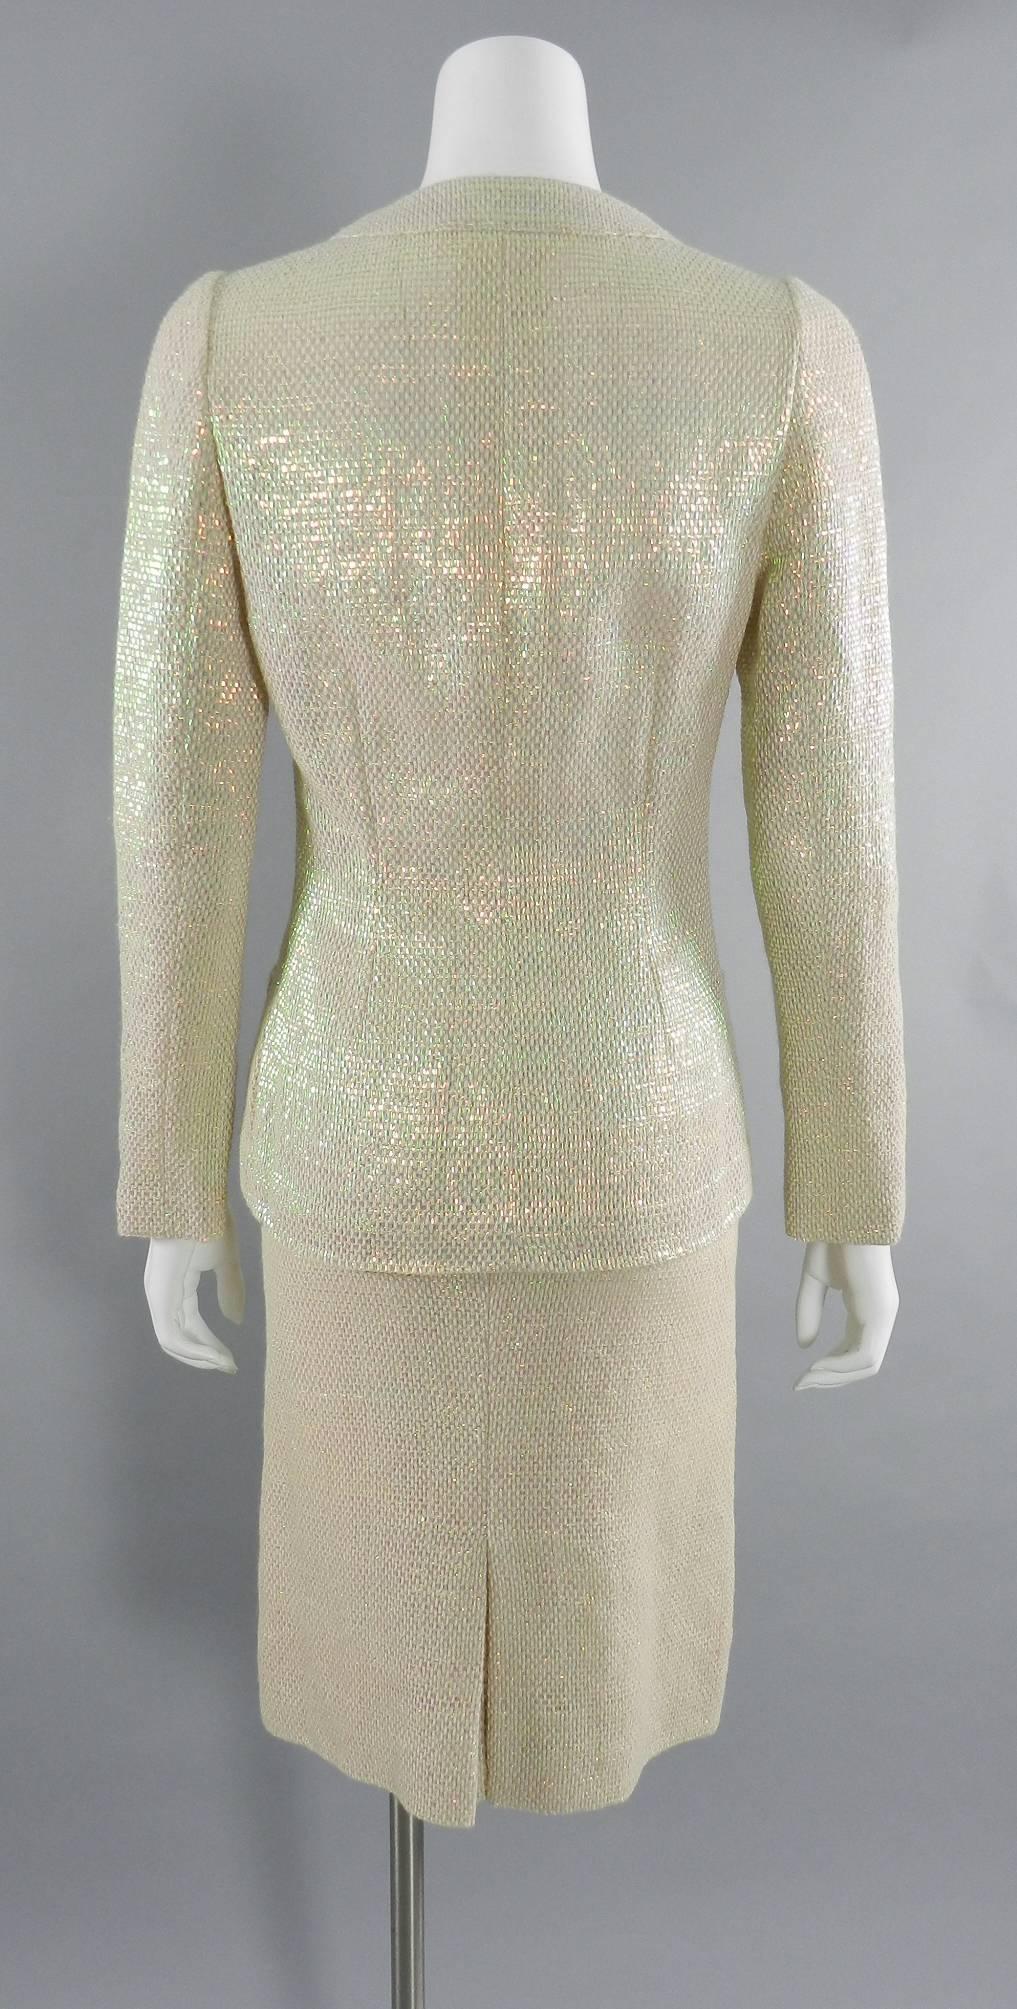 Chanel Spring 1999 Haute Couture Runway Shimmer Suit 1